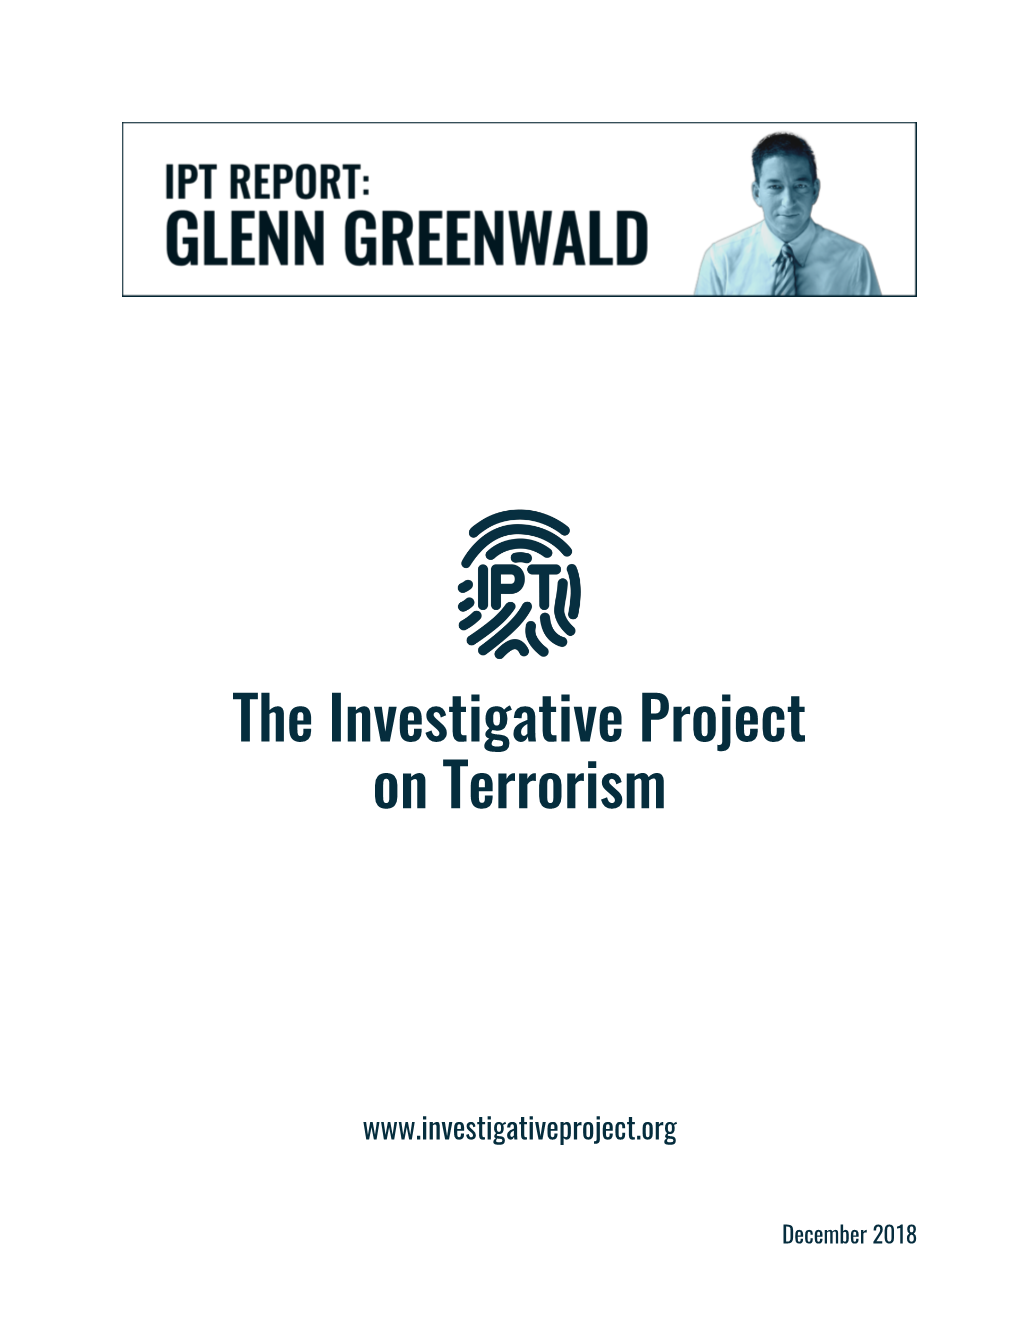 Greenwald's Most Egregious Claims